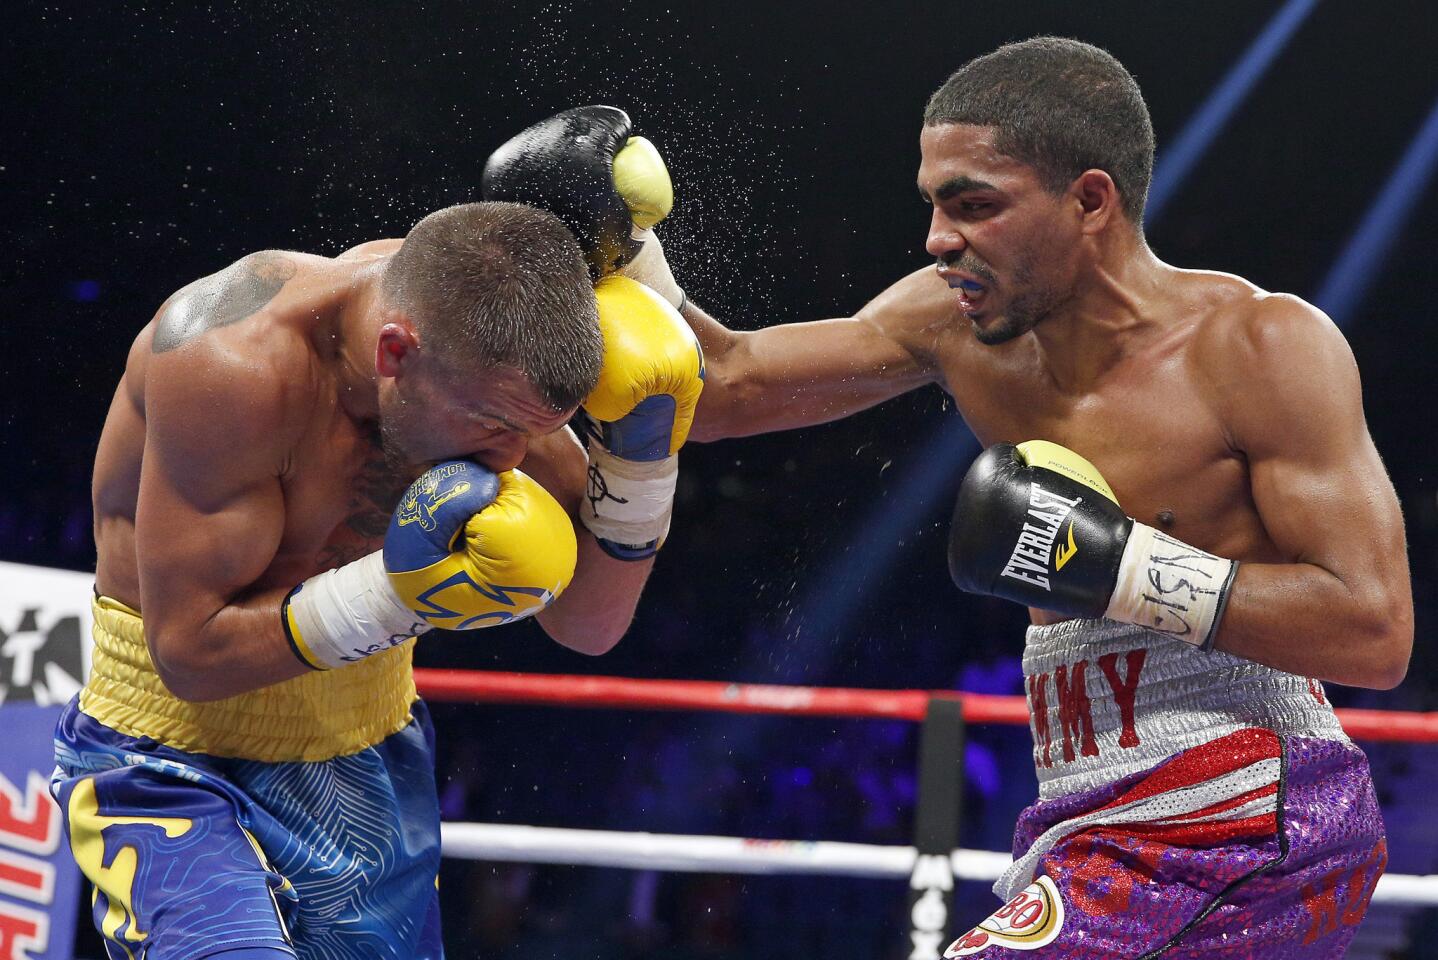 Vasyl Lomachenko tries to slip a punch by Gamalier Rodriguez during their featherweight title fight in Las Vegas.